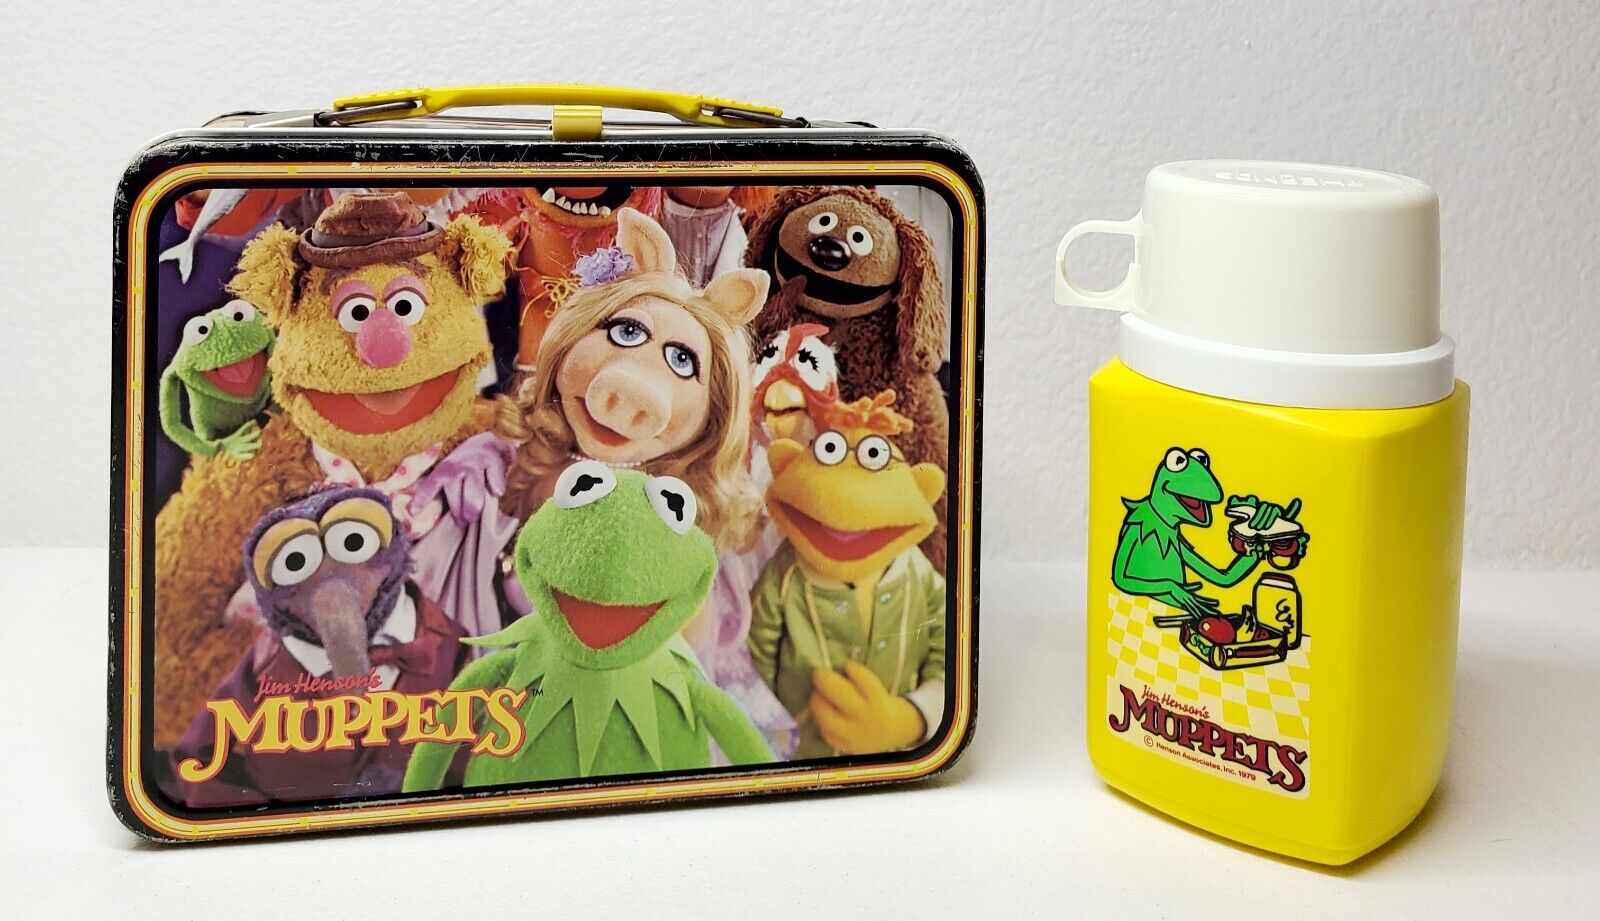 Vintage 1979 Jim Henson's Muppets ANIMAL Metal Lunchbox with Thermos